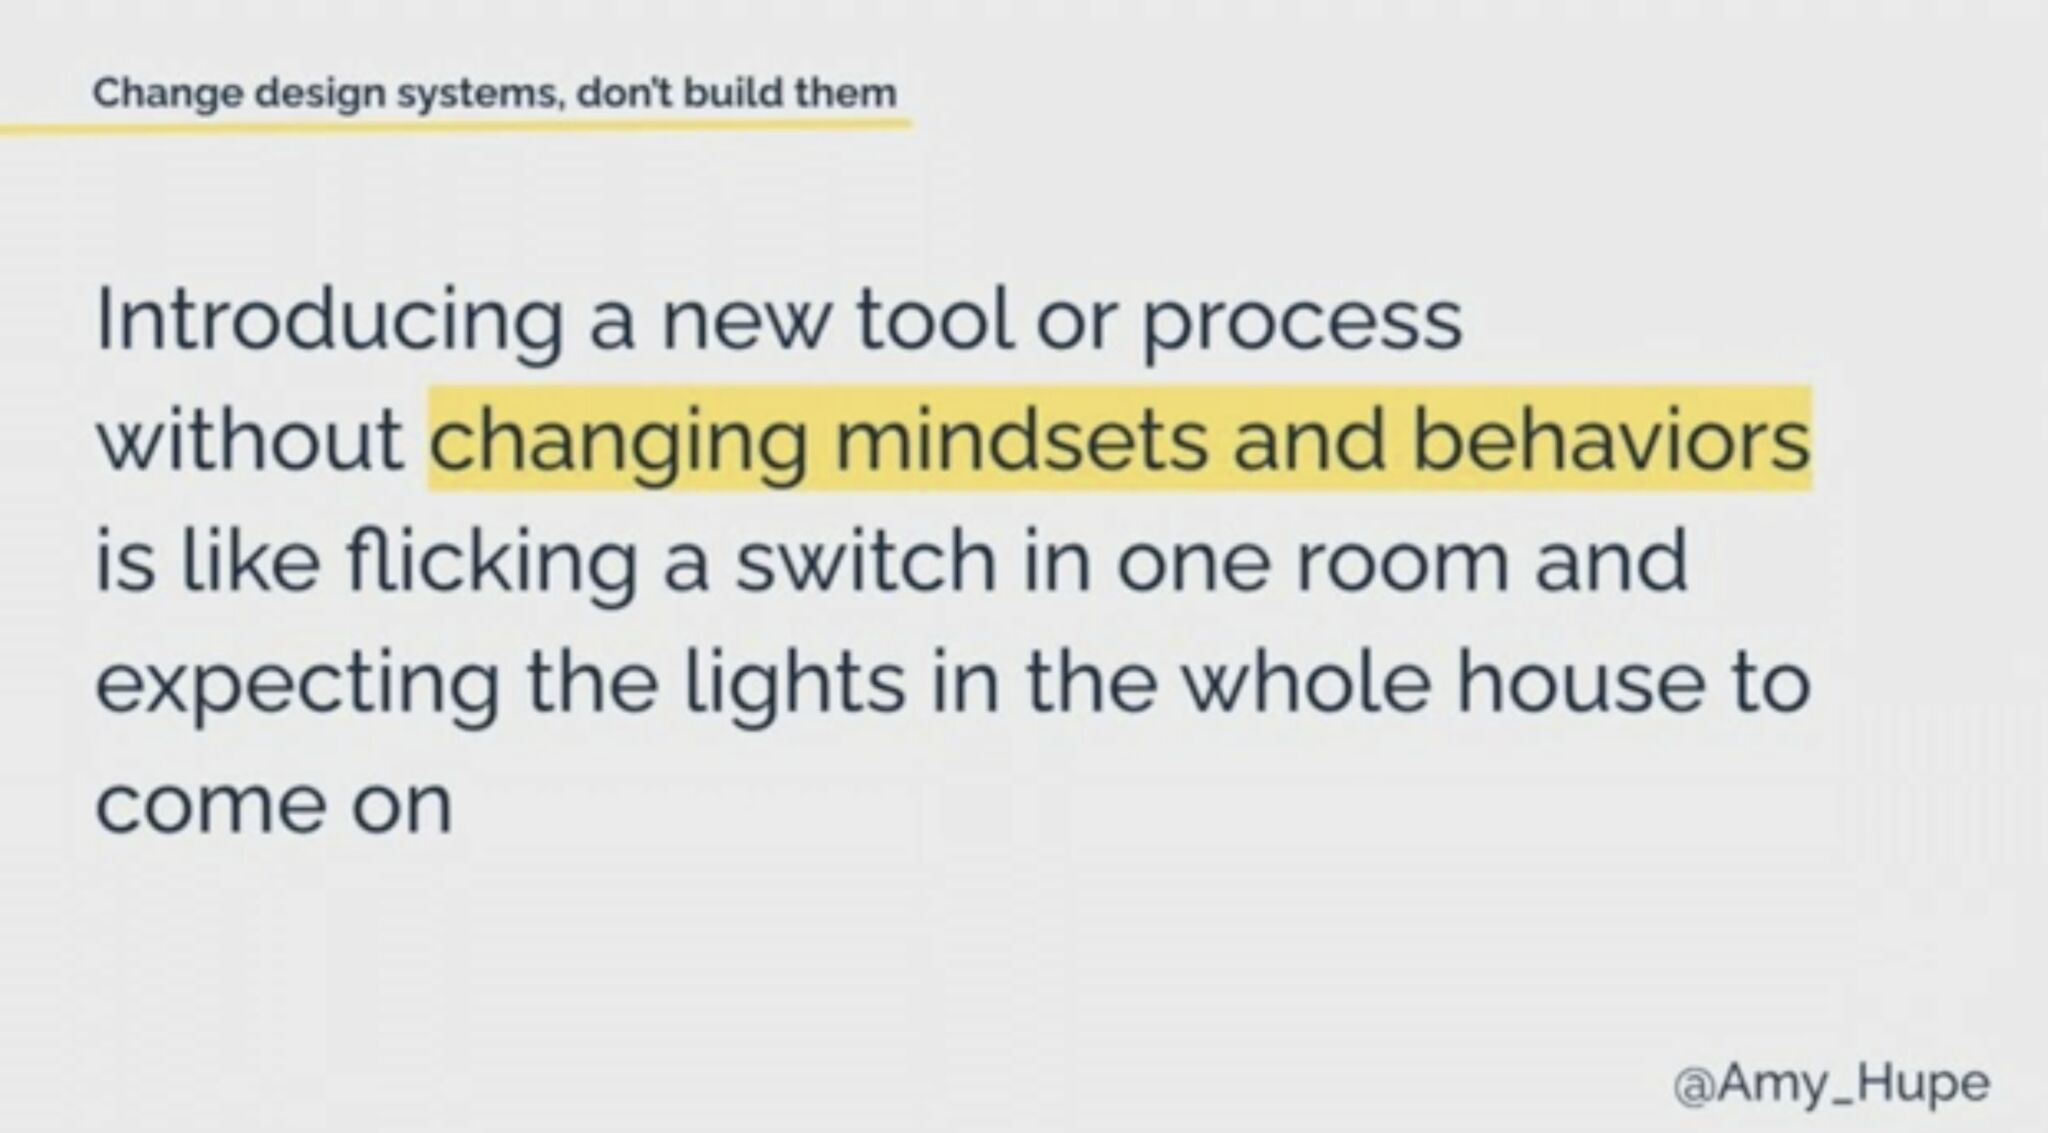 Amy Hupe - Introducing a new tool or process without changing mindsets and behaviors is like flicking a light switch in one room and expecting the lights in the whole house to come on.